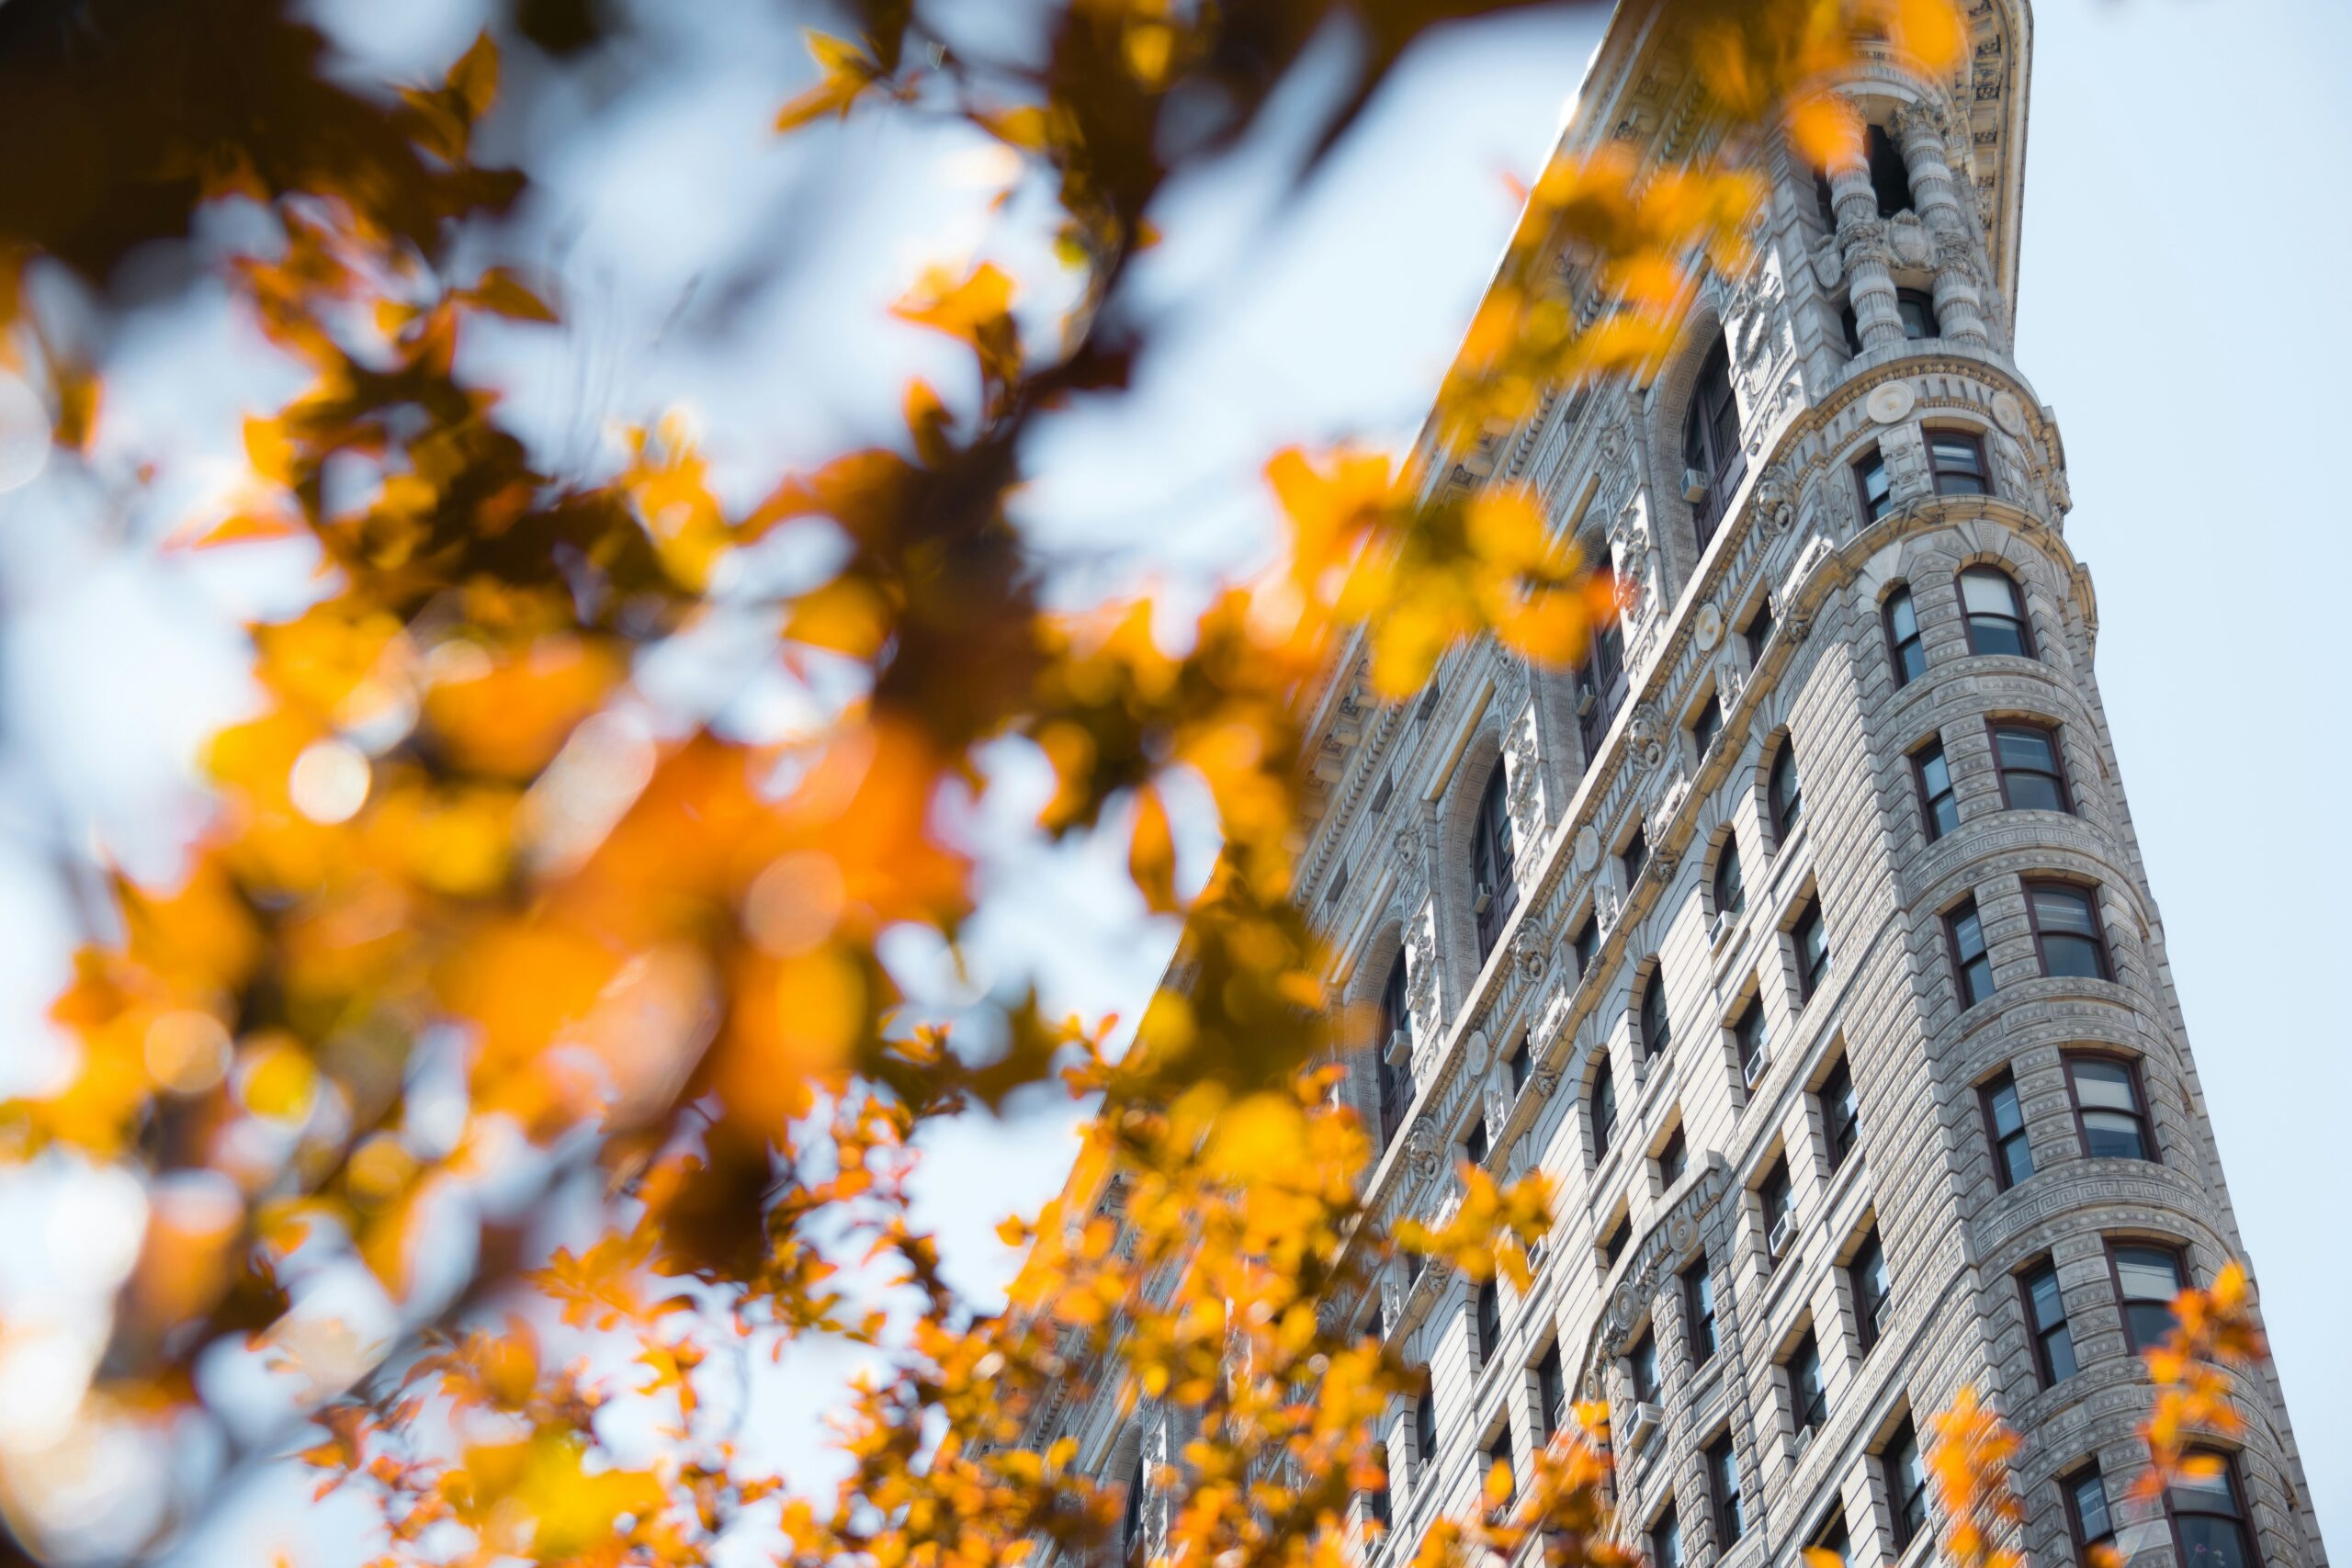 The weather in NYC during fall is one of the reasons it is the best time to visit. 
Pictured: NYC in fall